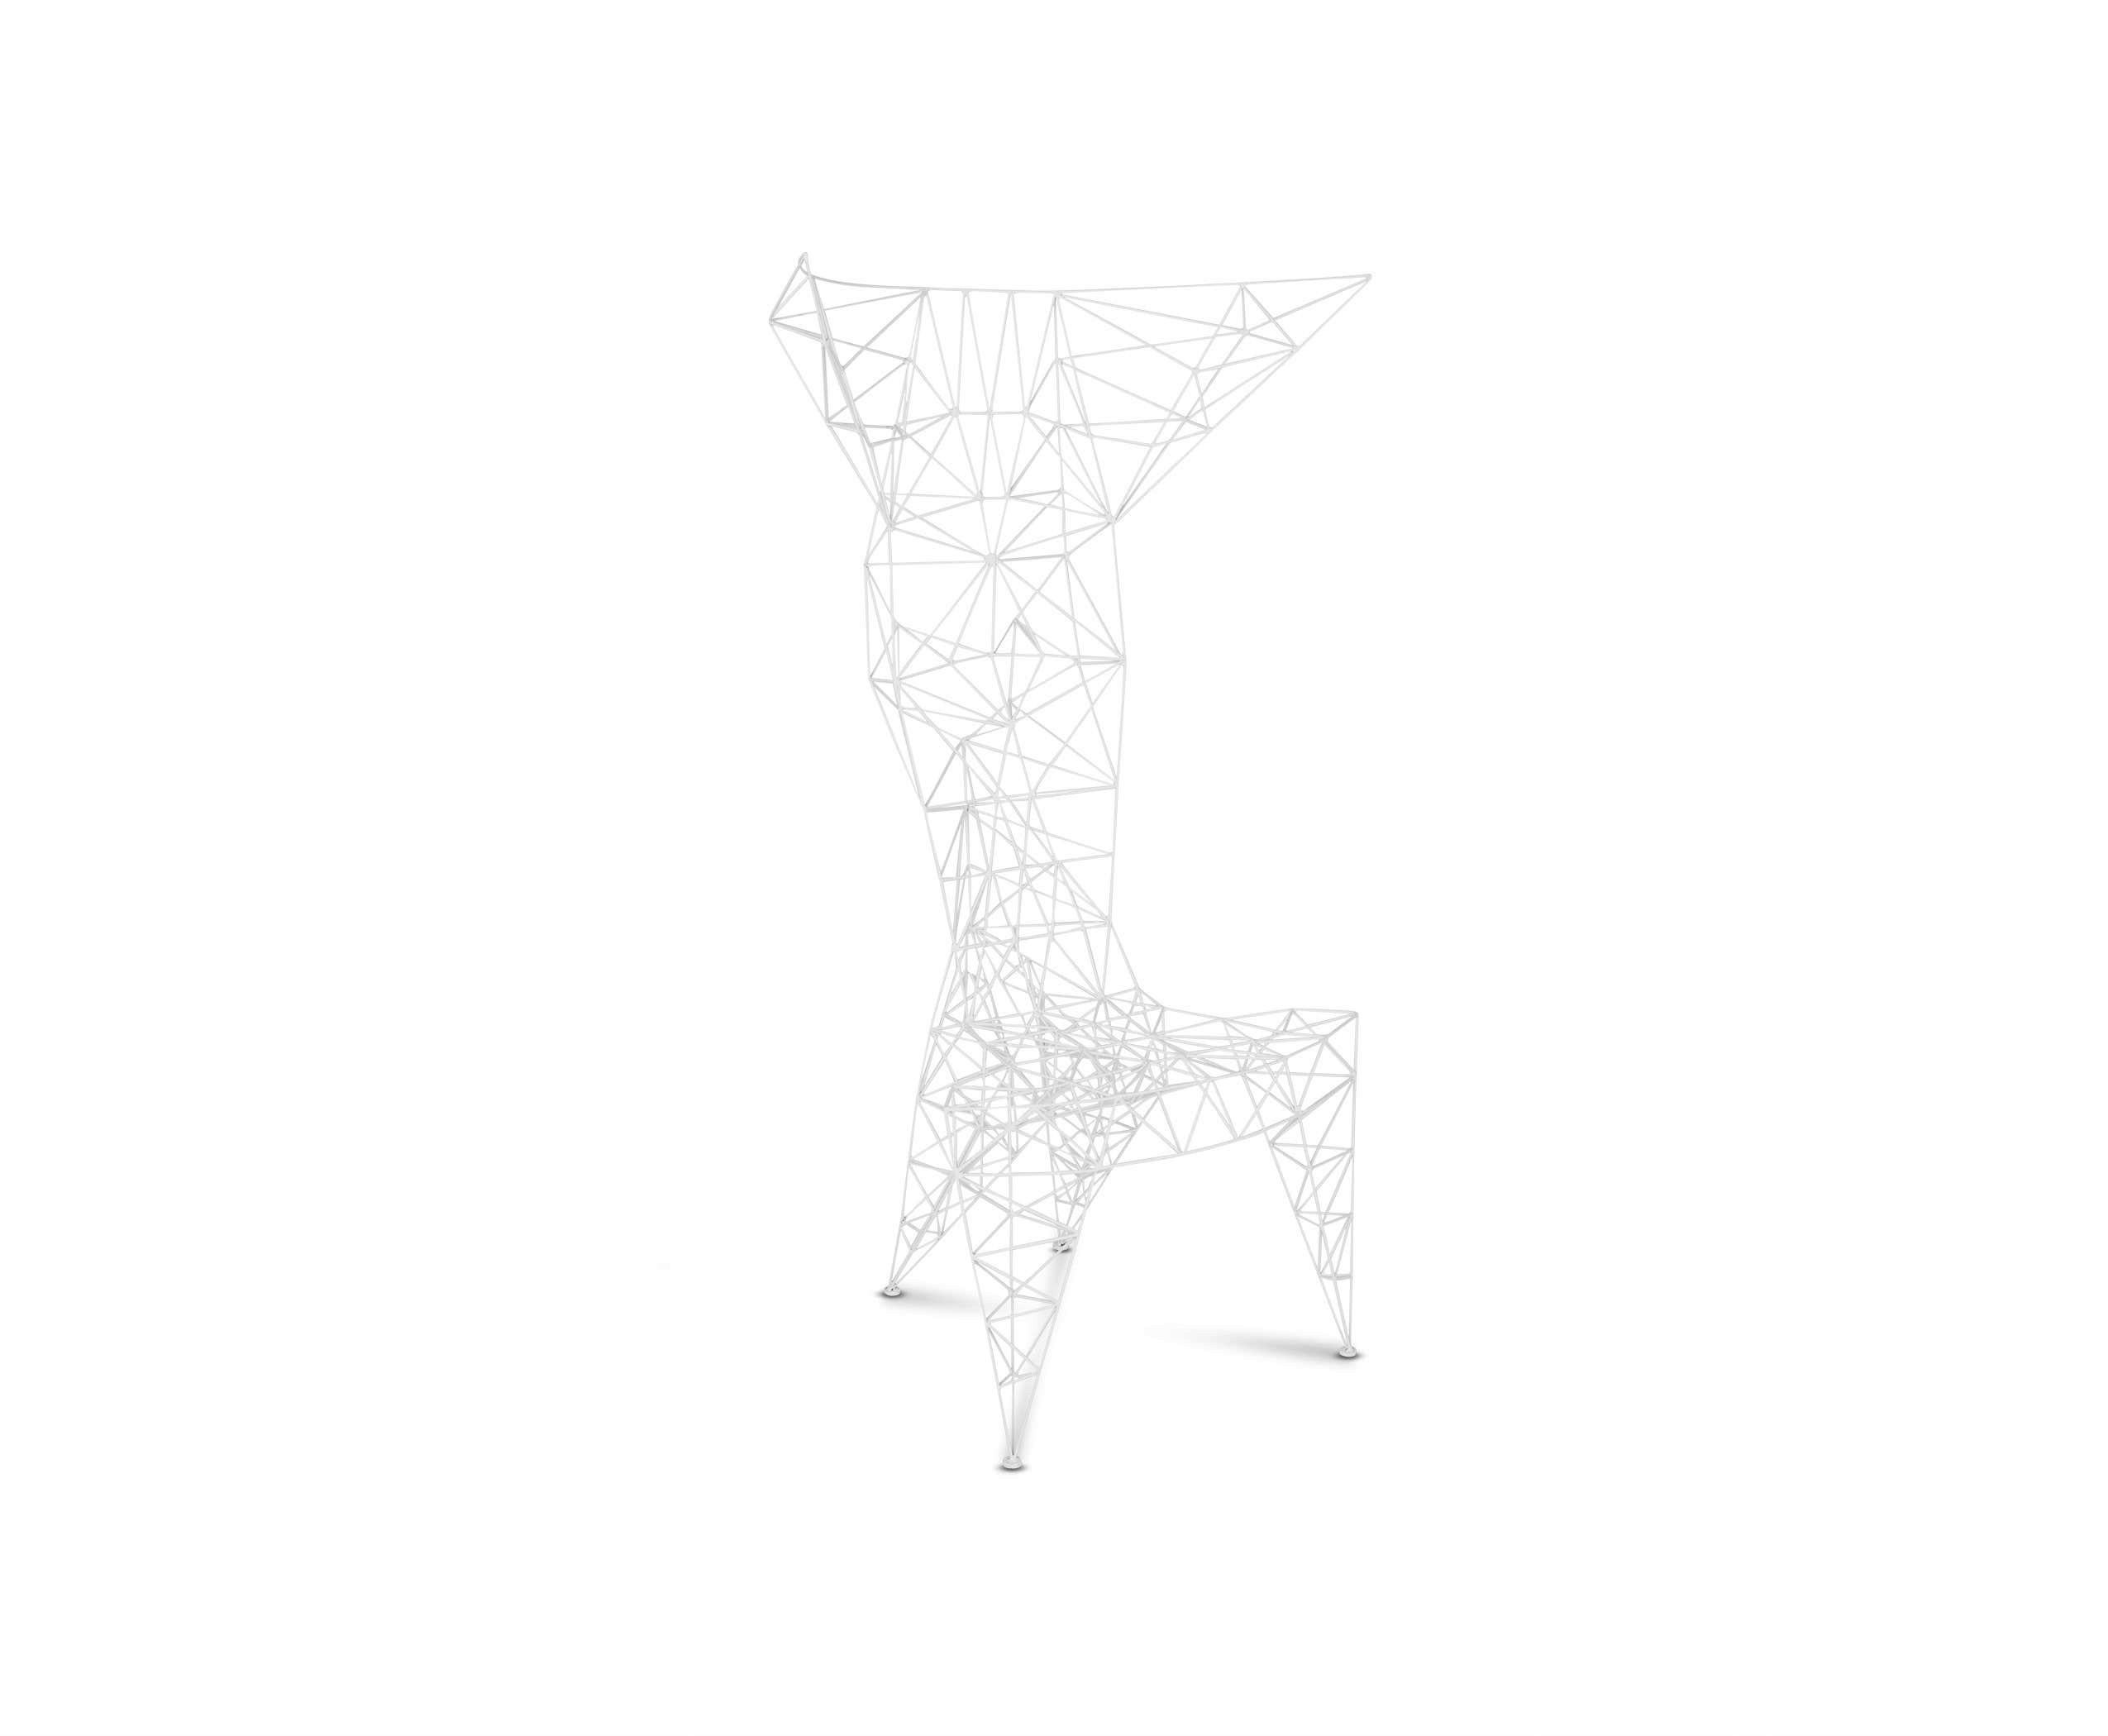 Originally created on a self-propelled mission to design the world's lightest metal chair, Pylon was made in a small series in Dixon's metal workshop in the early 1990s. The lattice work of 3mm diameter steel rod is triangulated for maximum strength